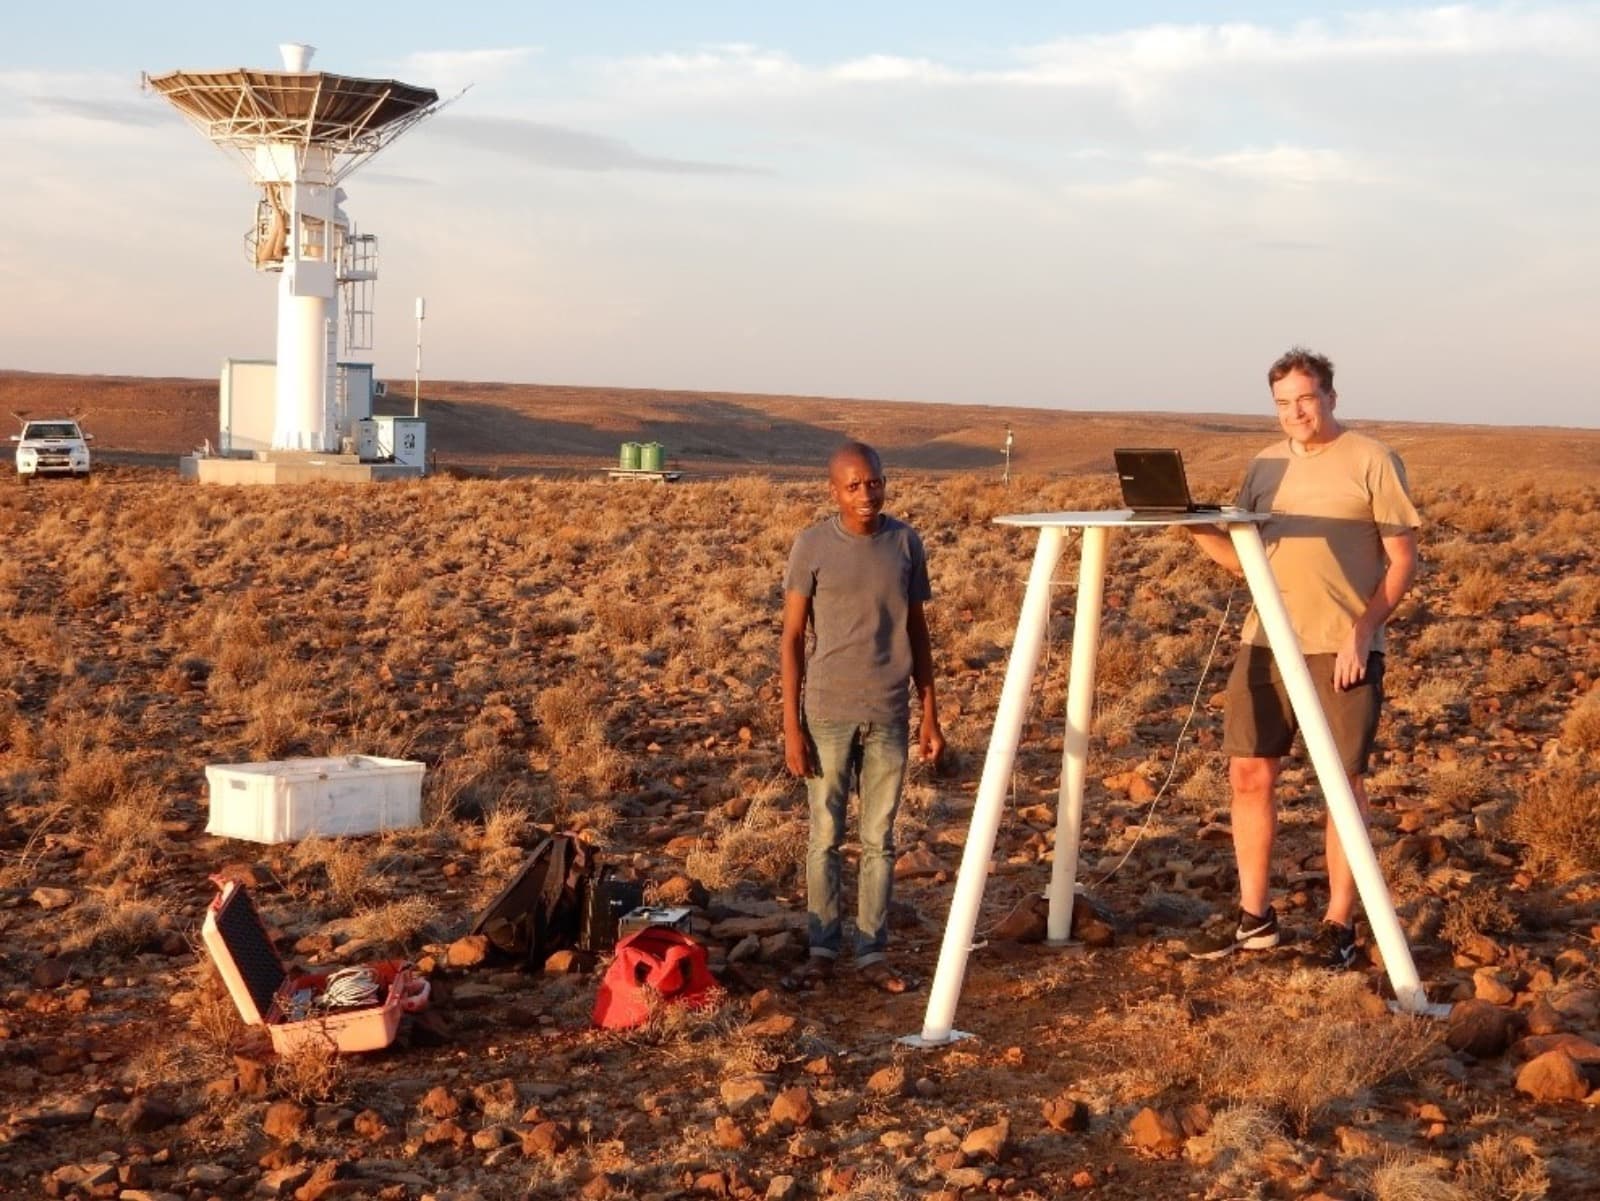 A campaign to observe Transient Luminous Events (called sprites) from the Karoo desert in South Africa.